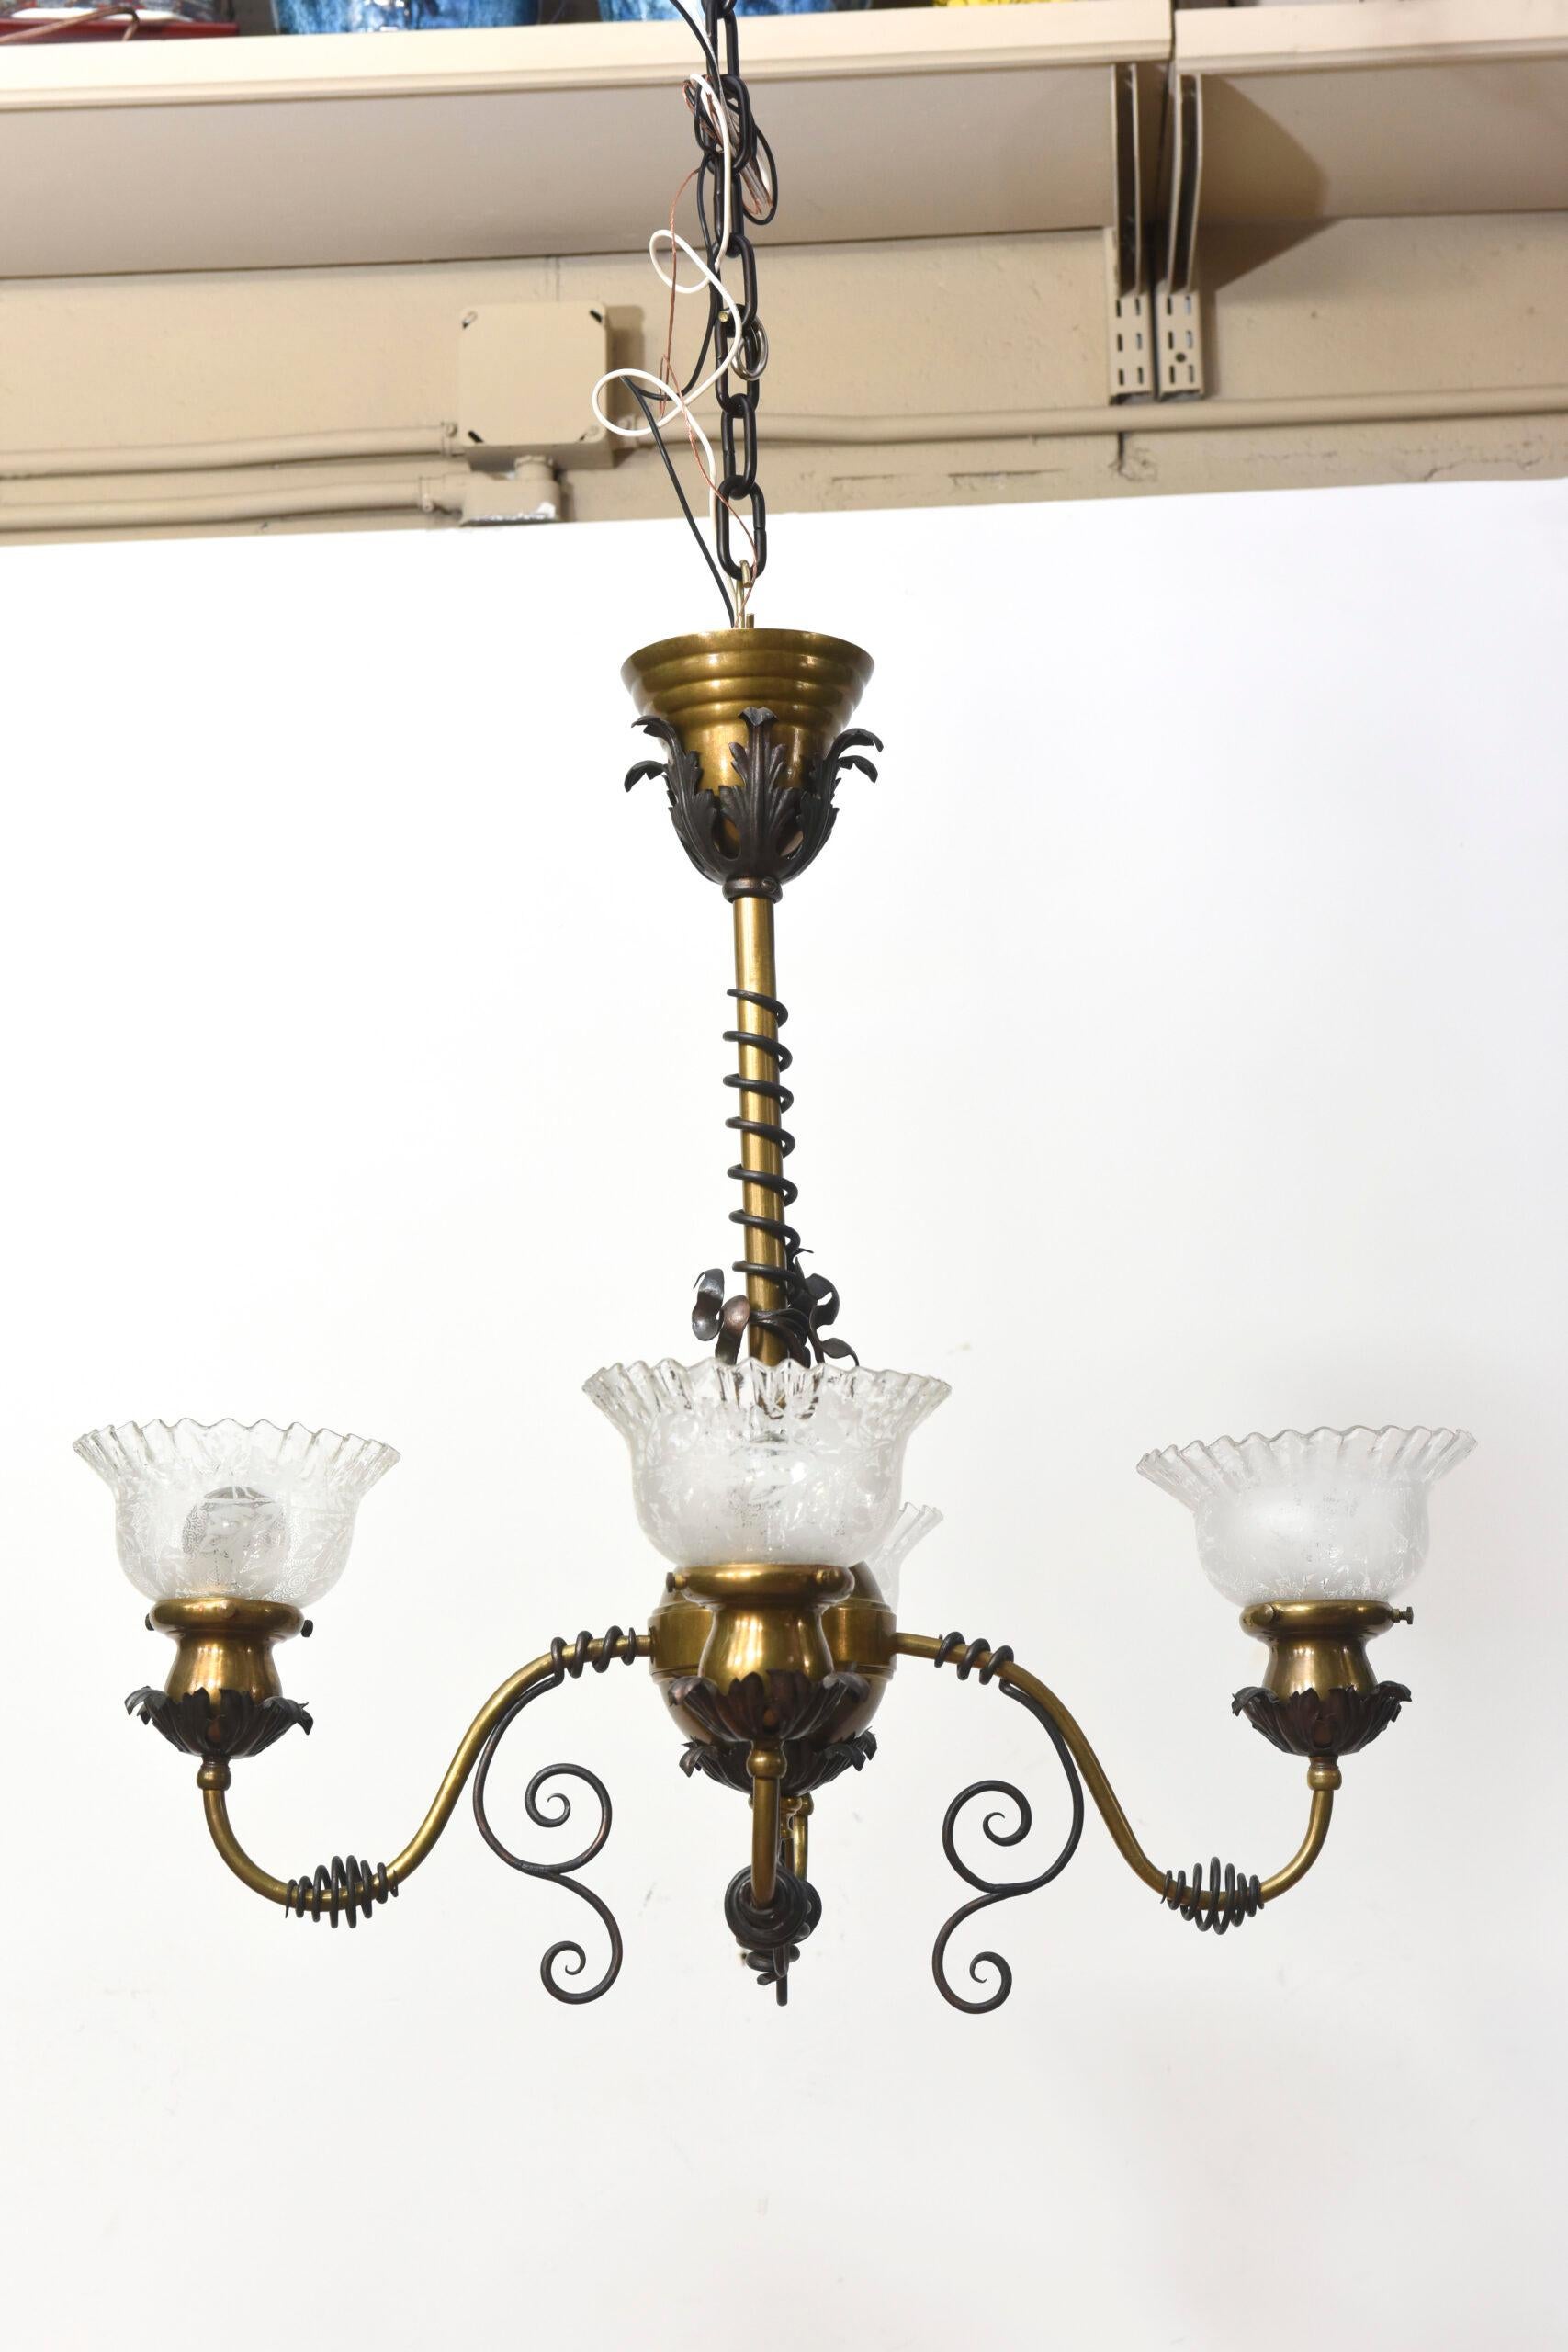 Four Light Brass and Wrought Iron Early Electric Fixture For Sale 2